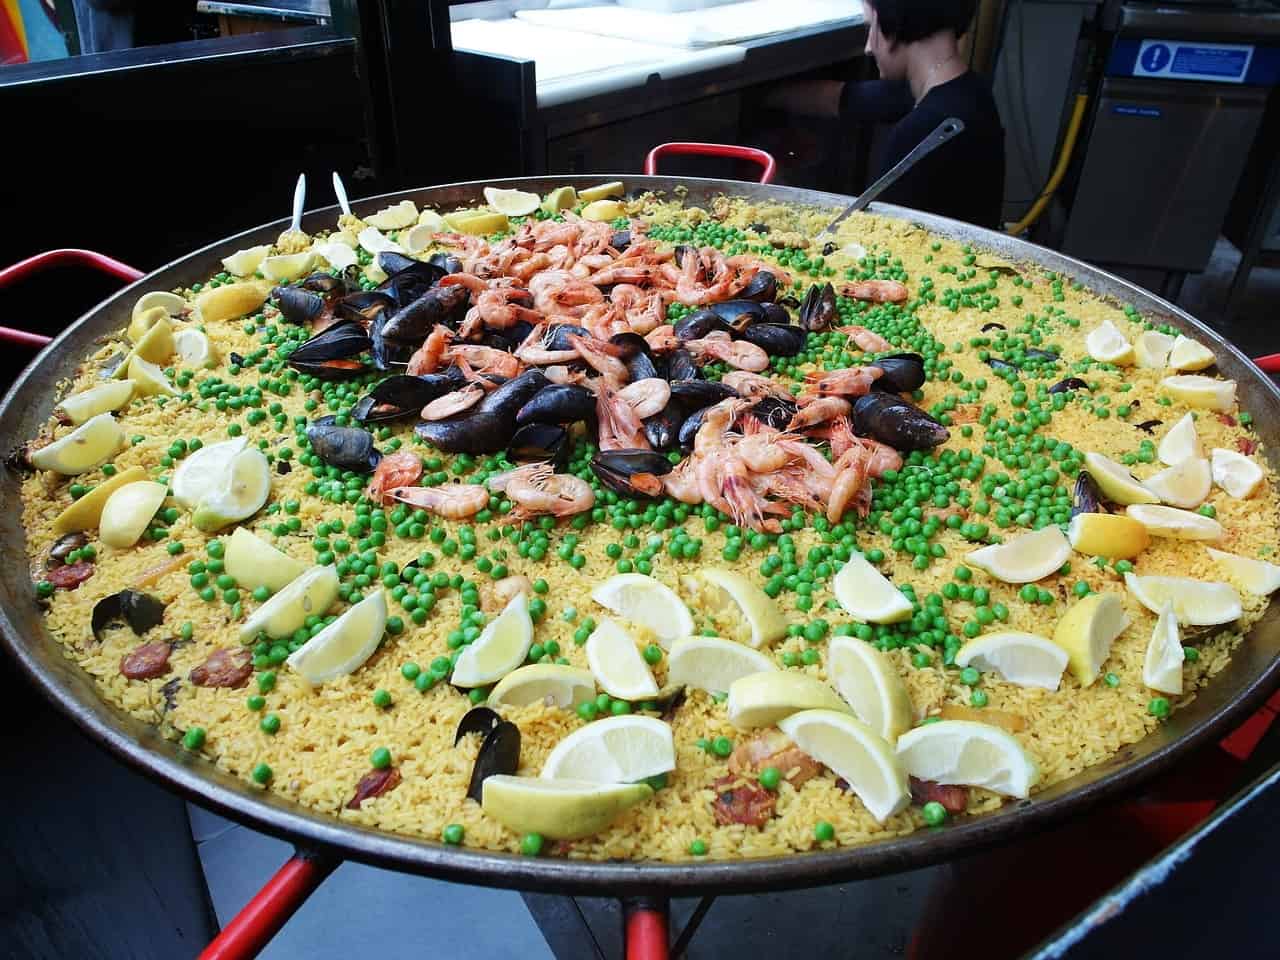 Paella being cooked by a local vendor in Borough Market. Image source: Pixabay user hjjeon.